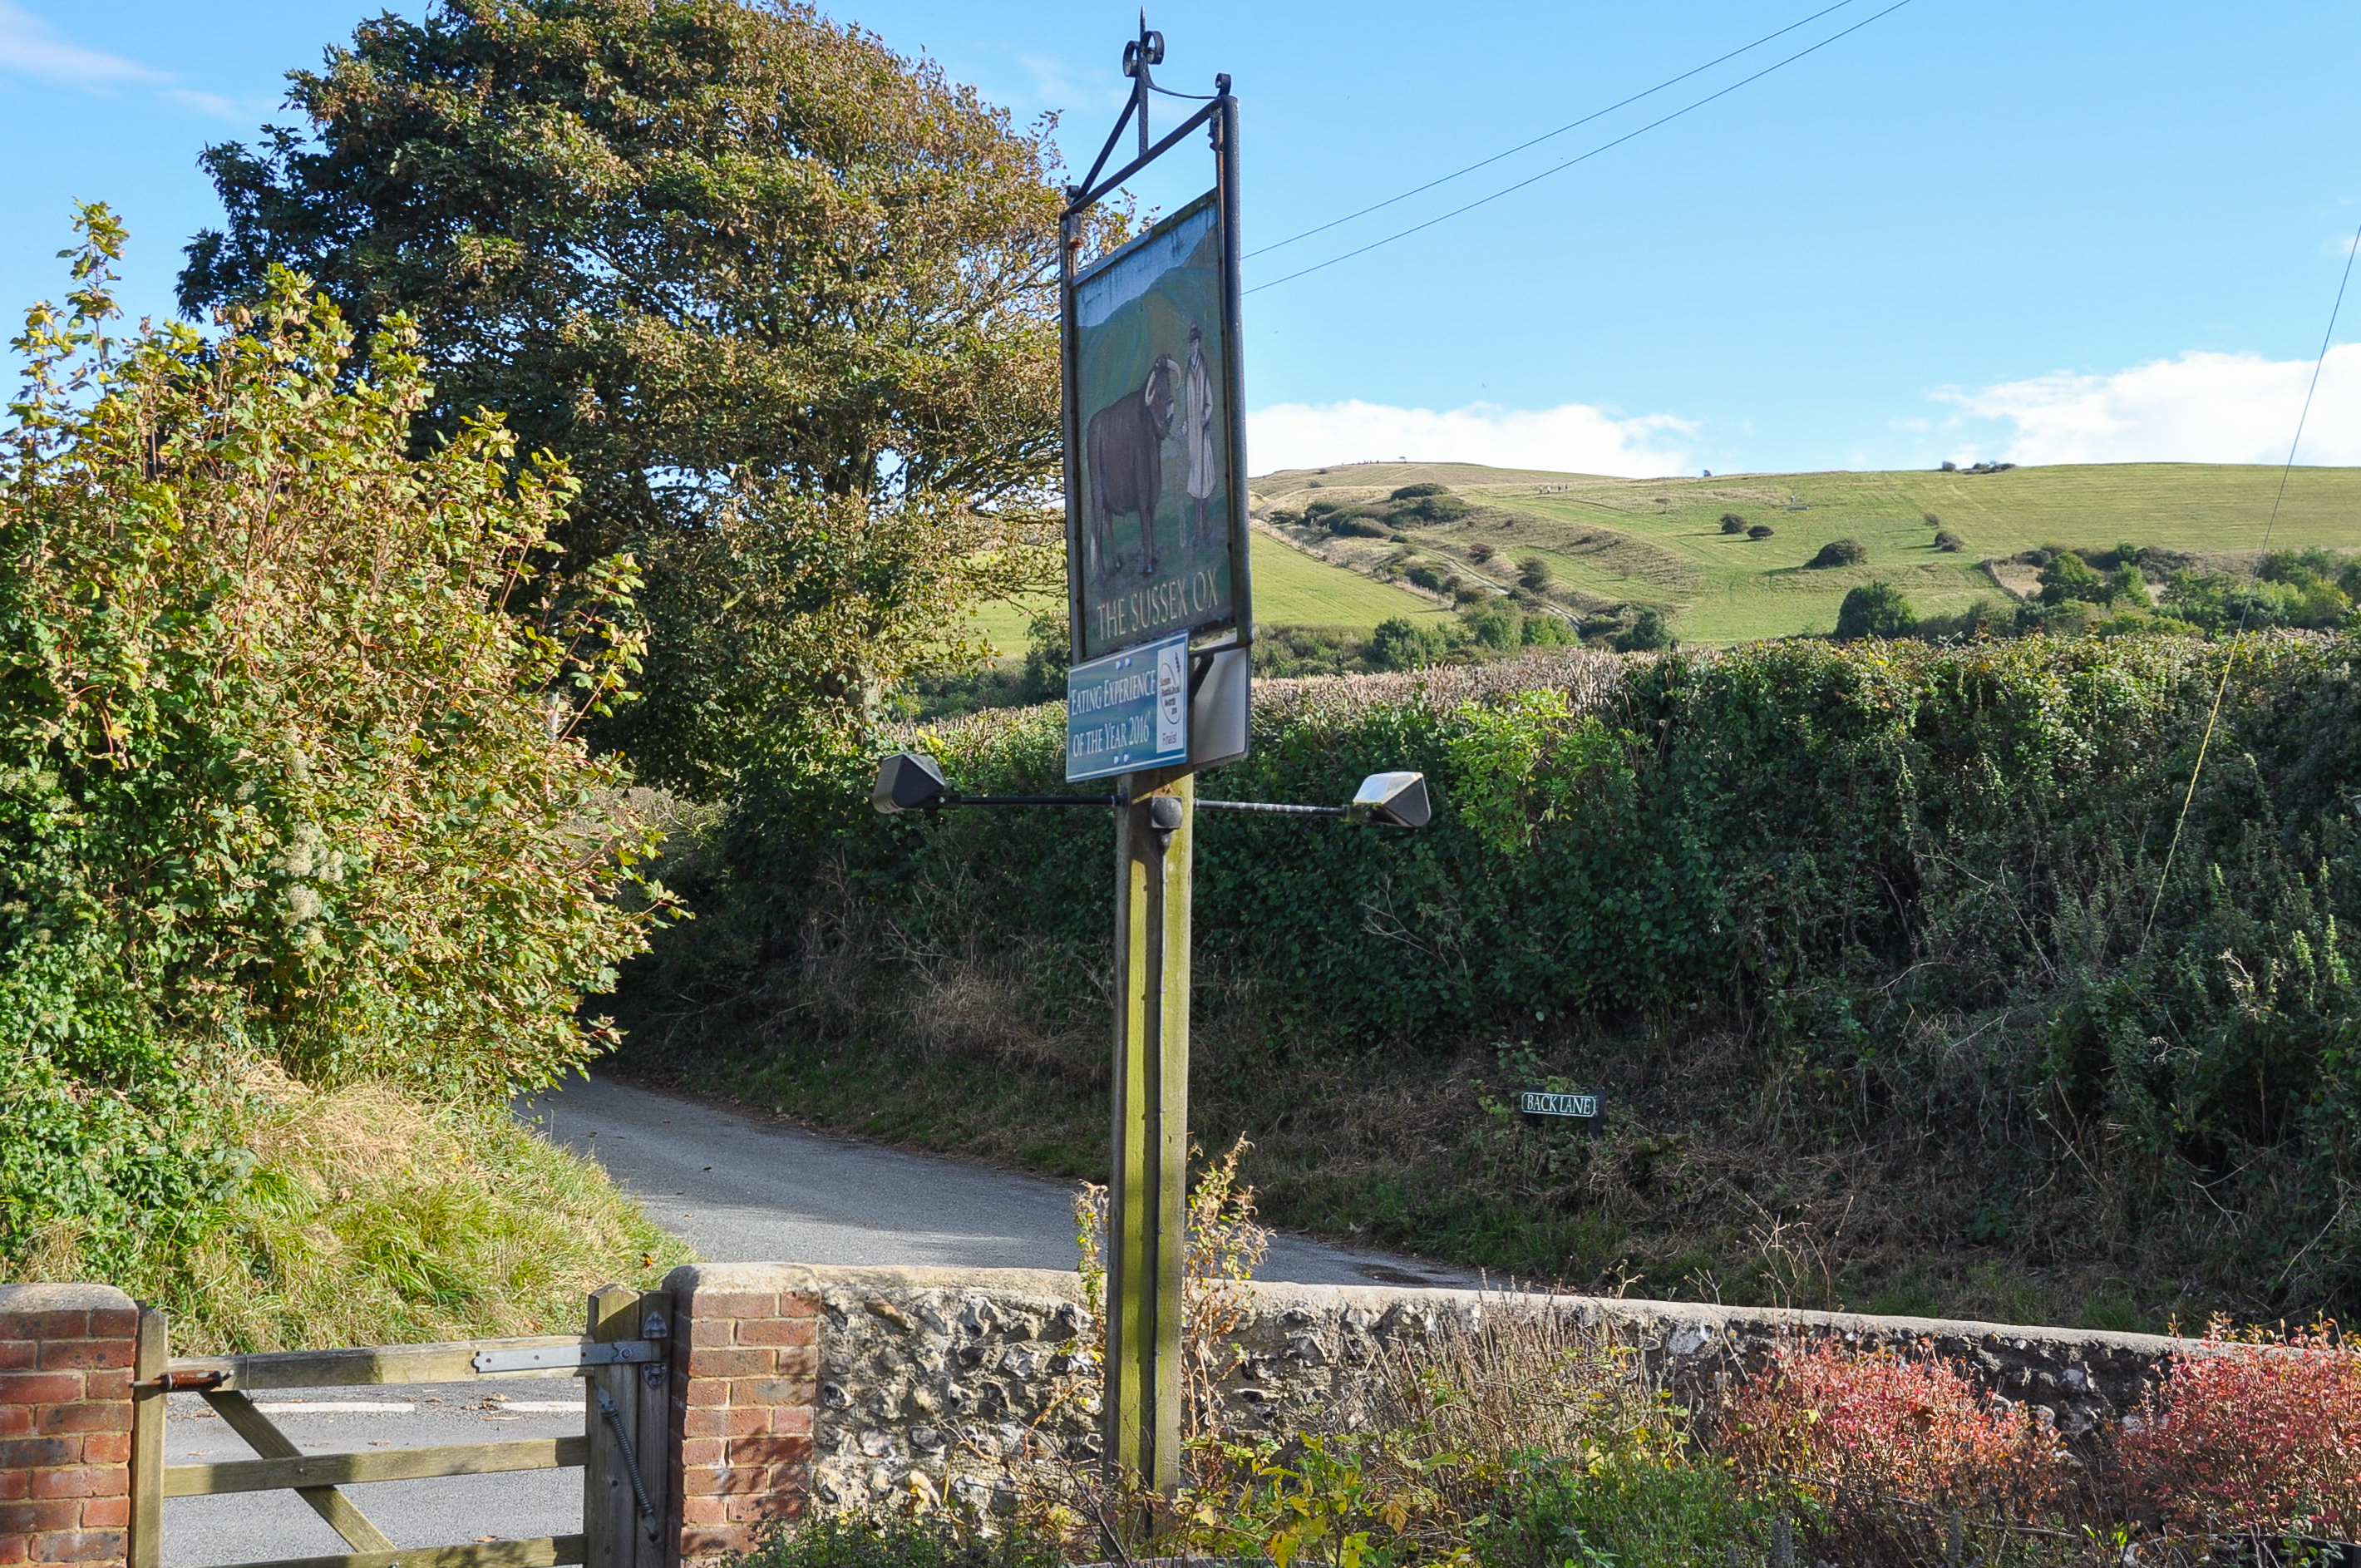 Days Out in Sussex - Alfriston and the Cuckmere Valley by Sarah Agnew Photos